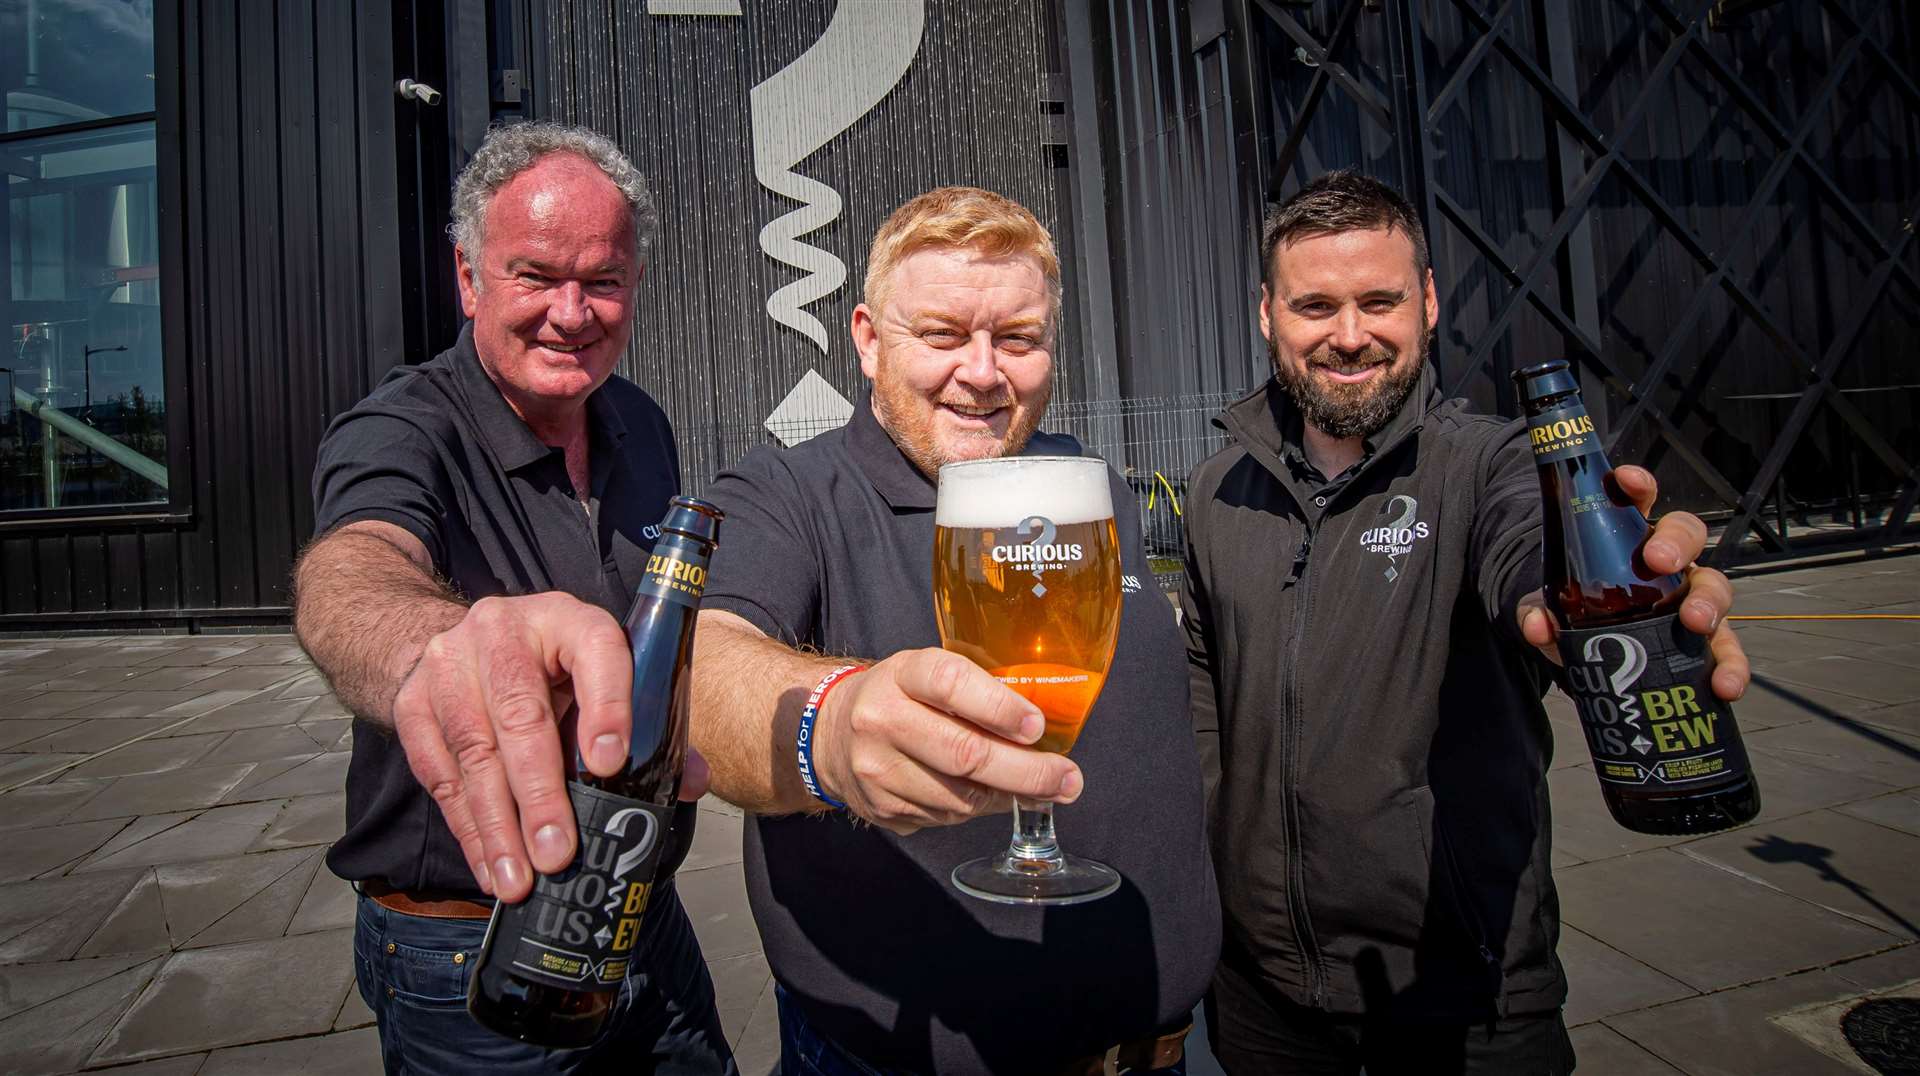 Curious Brewery in Ashford has been bought by St Peter's Brewery in Suffolk. Company Director Mark Crowther (L) and MD Simon George (C) have both resigned, while Operations Director Matt Anderson (R) remains at the company.